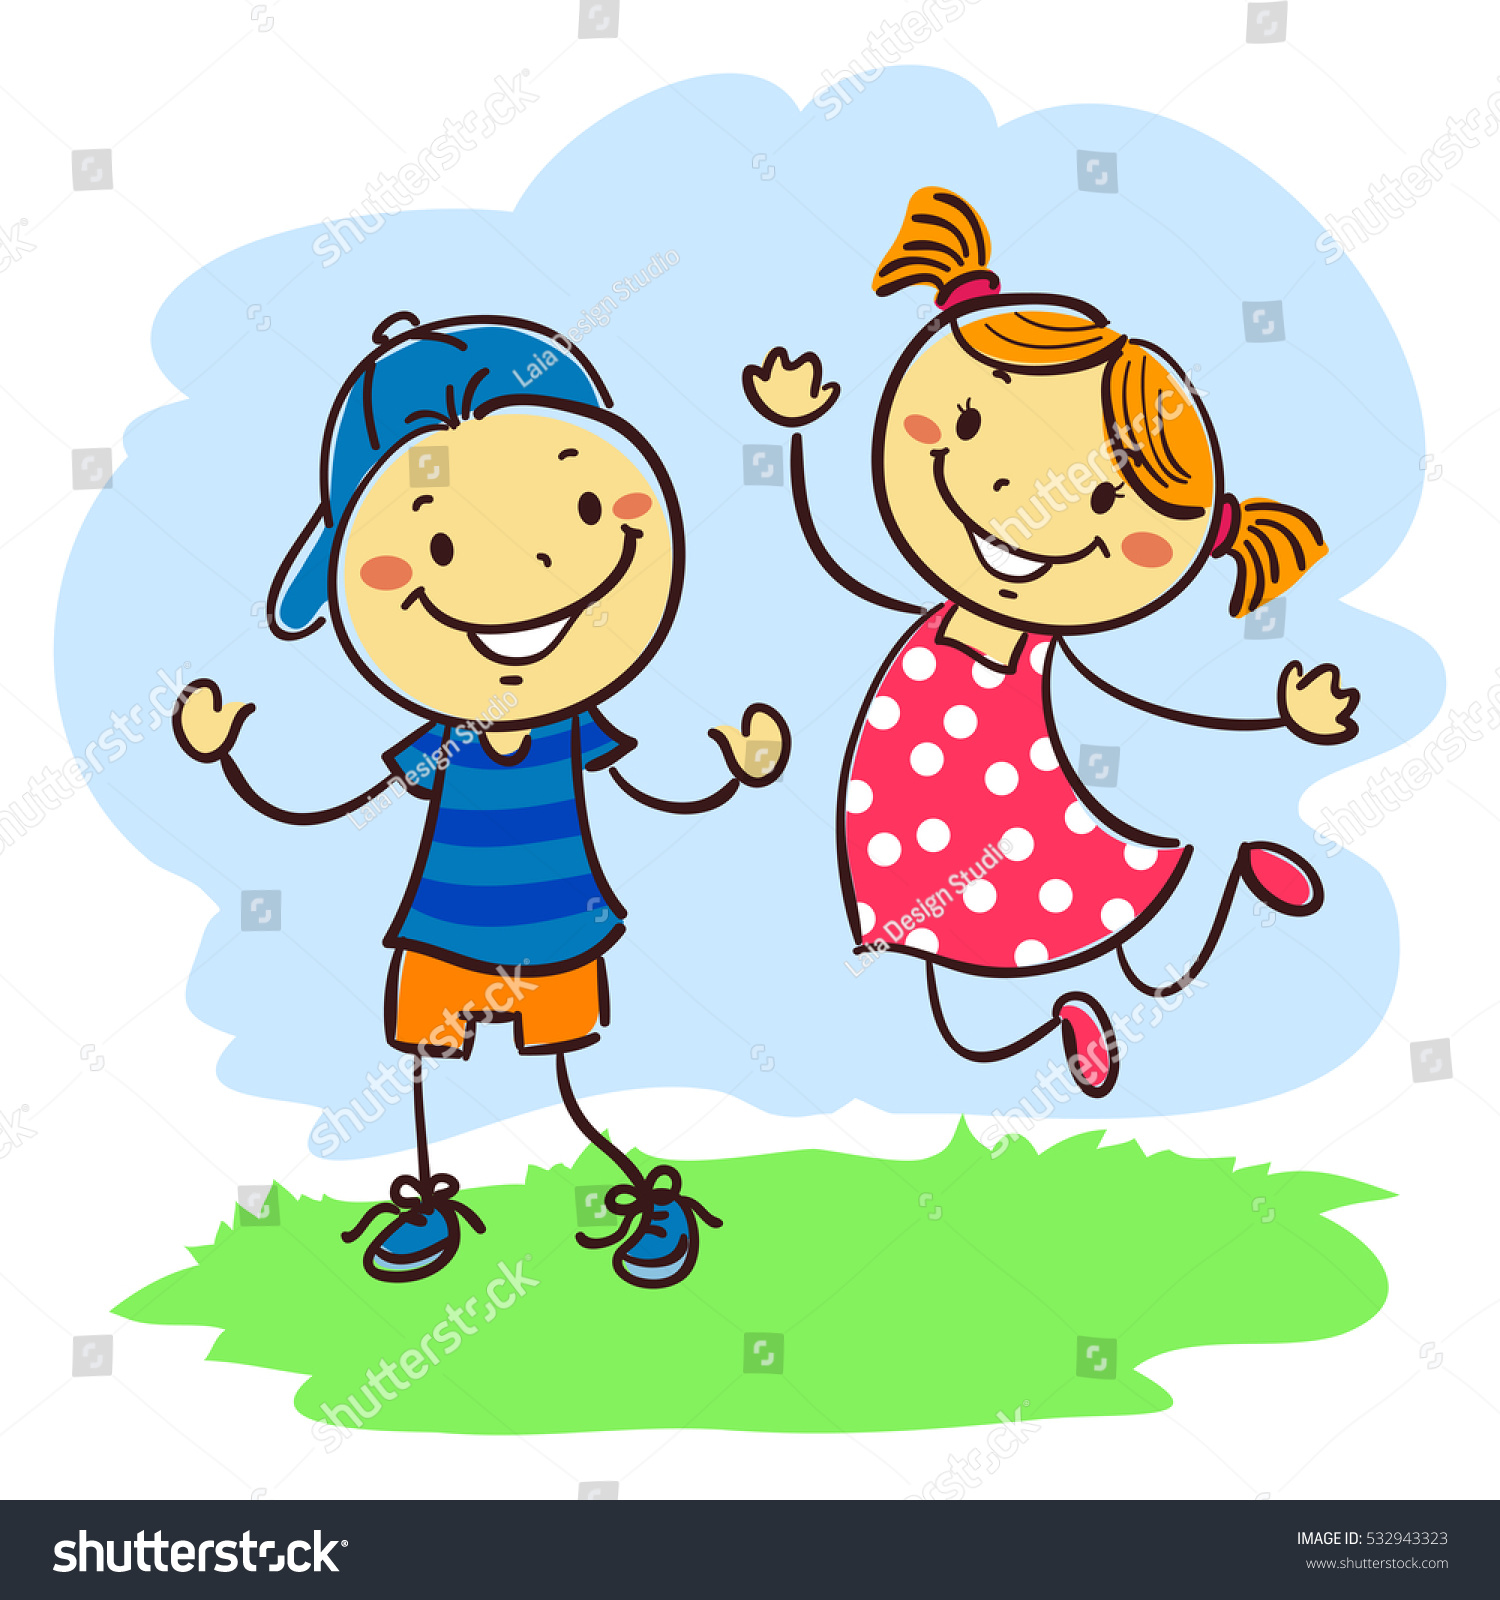 Vector Illustration Kids Playing Stick Figures Stock Vector ...